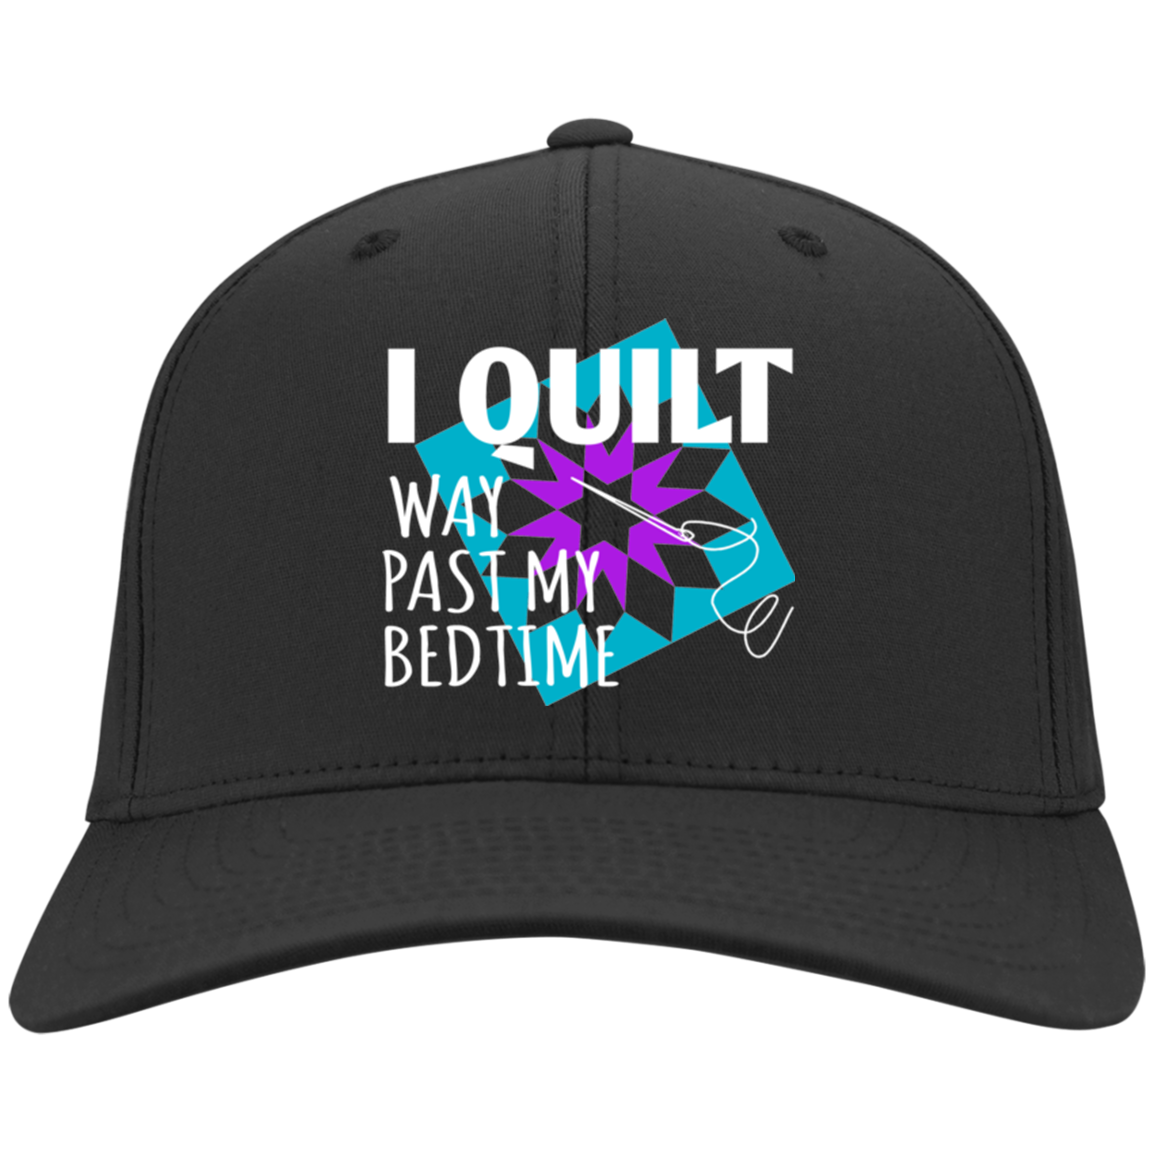 I Quilt Way Past My Bedtime Twill Cap